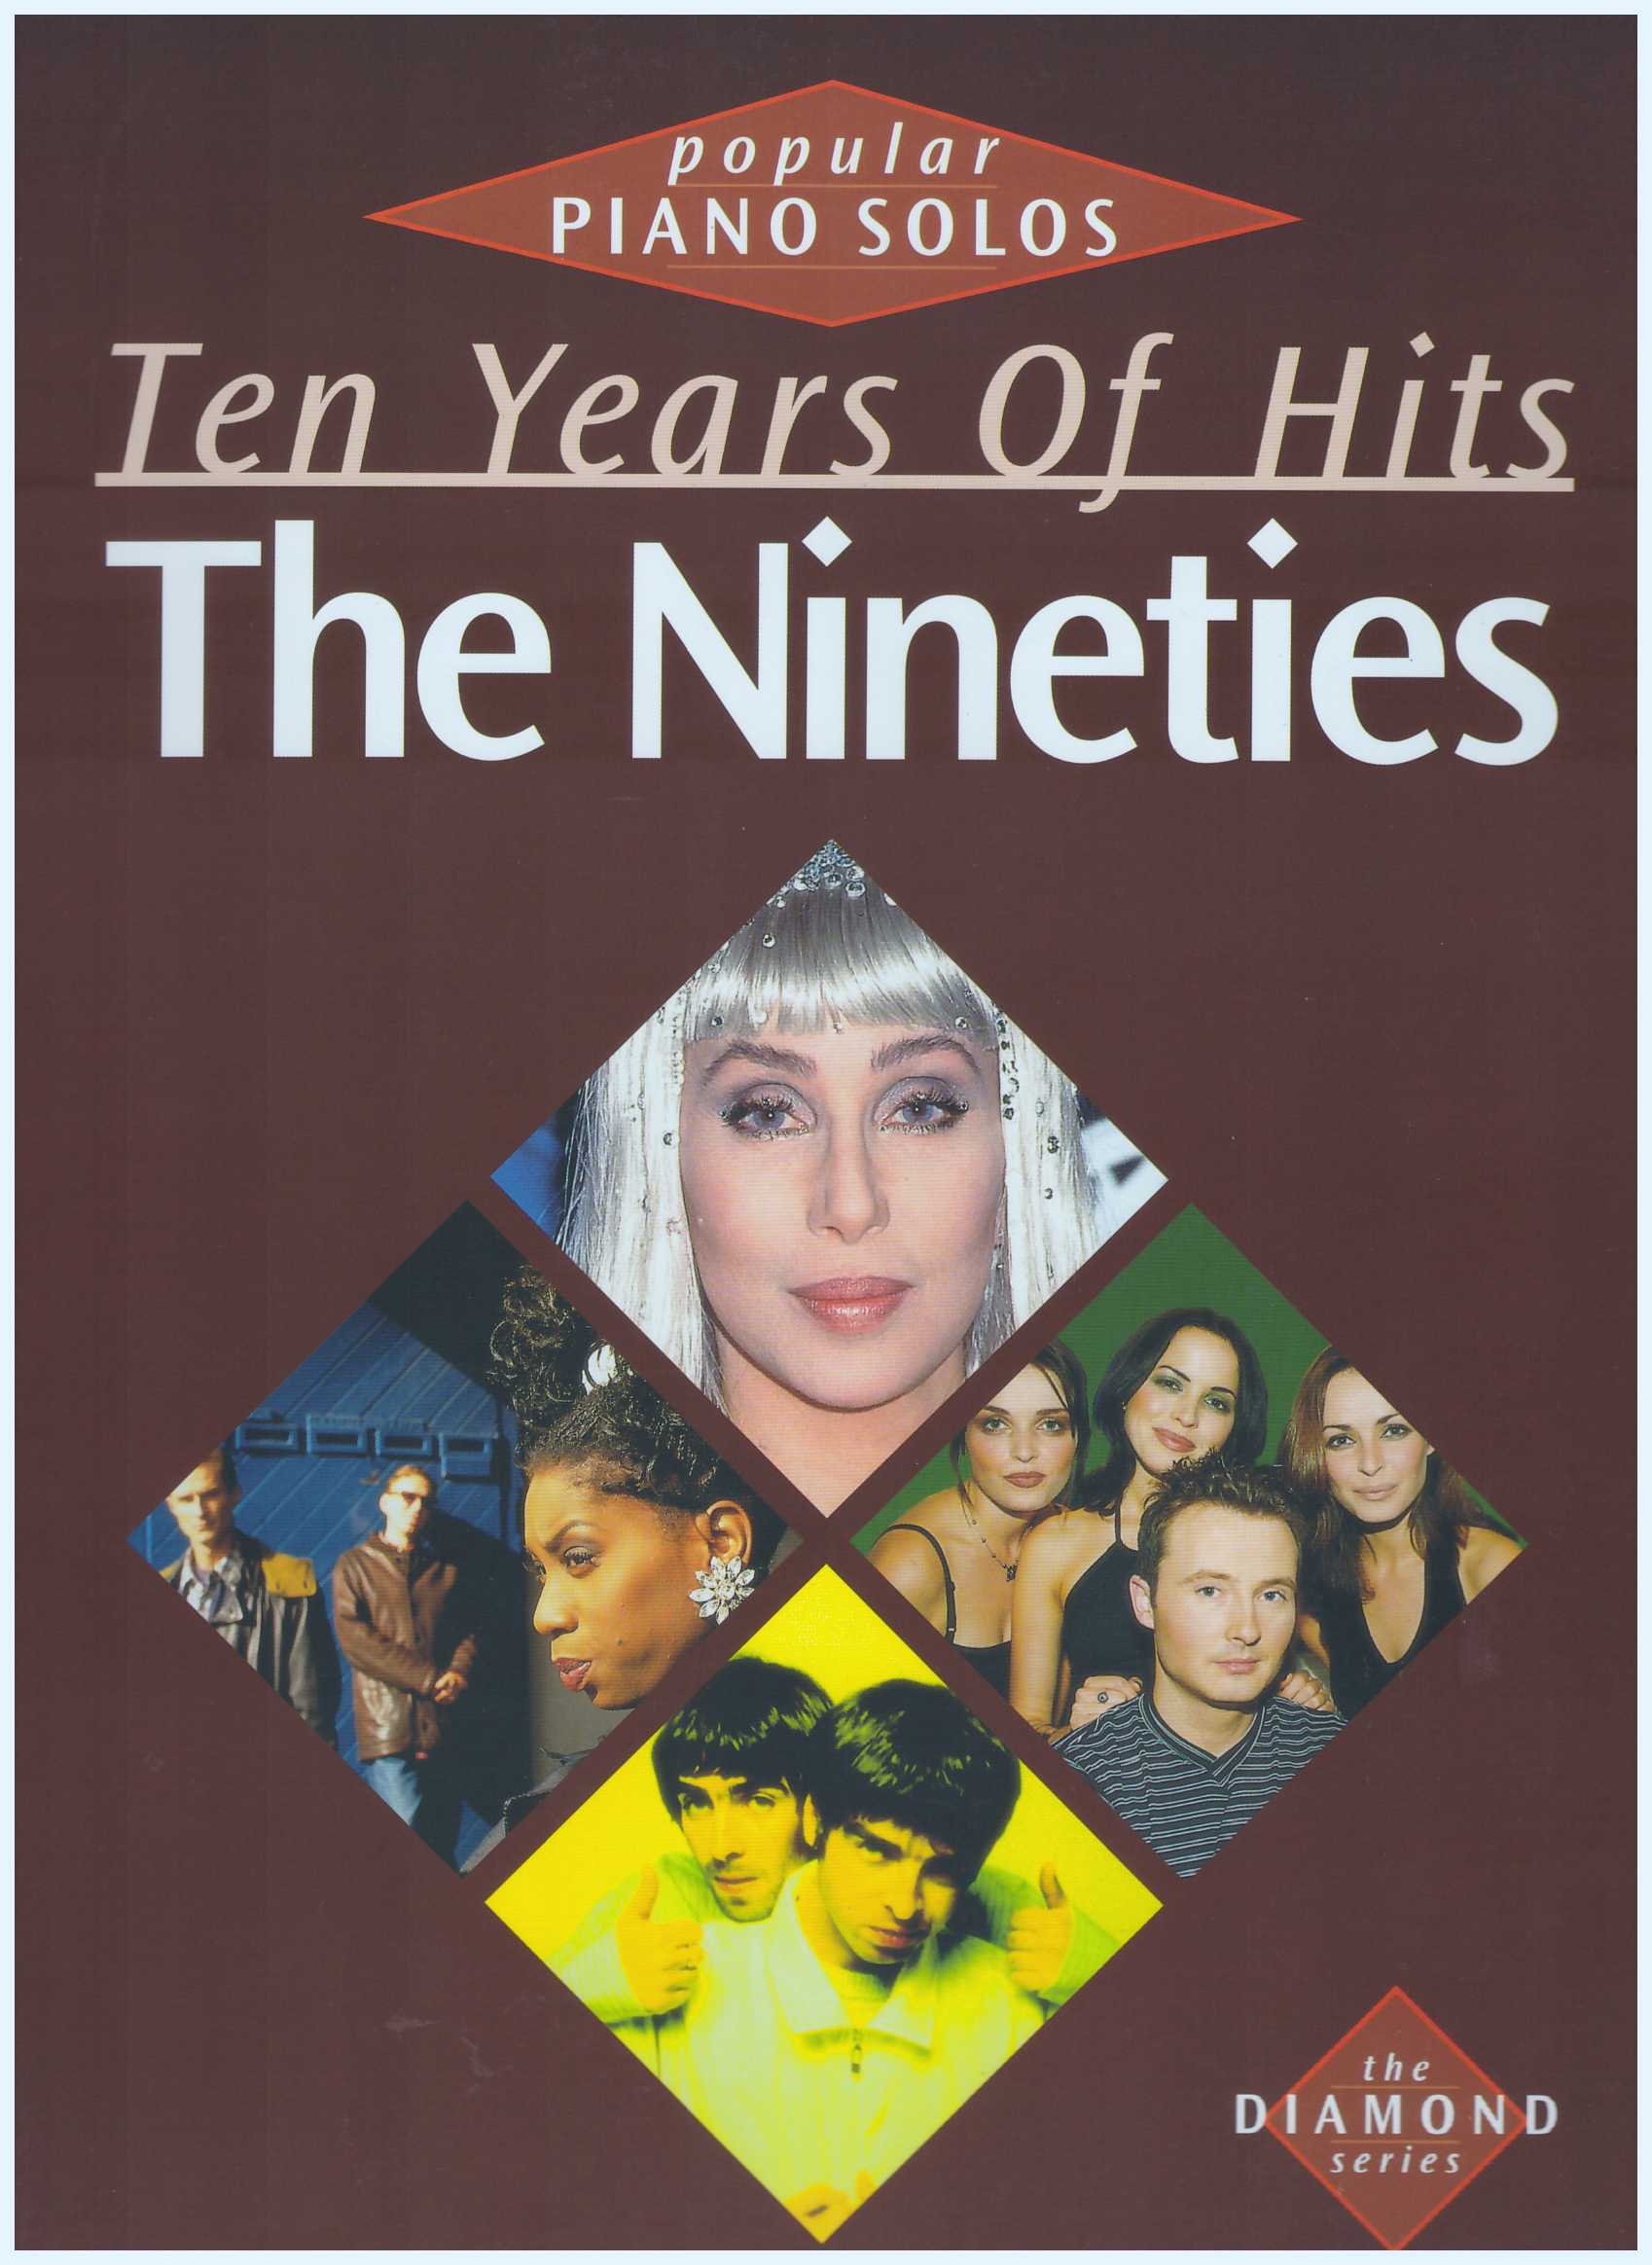 Popular Piano Solos Ten Years Of Hits The Nineties / Piano Book